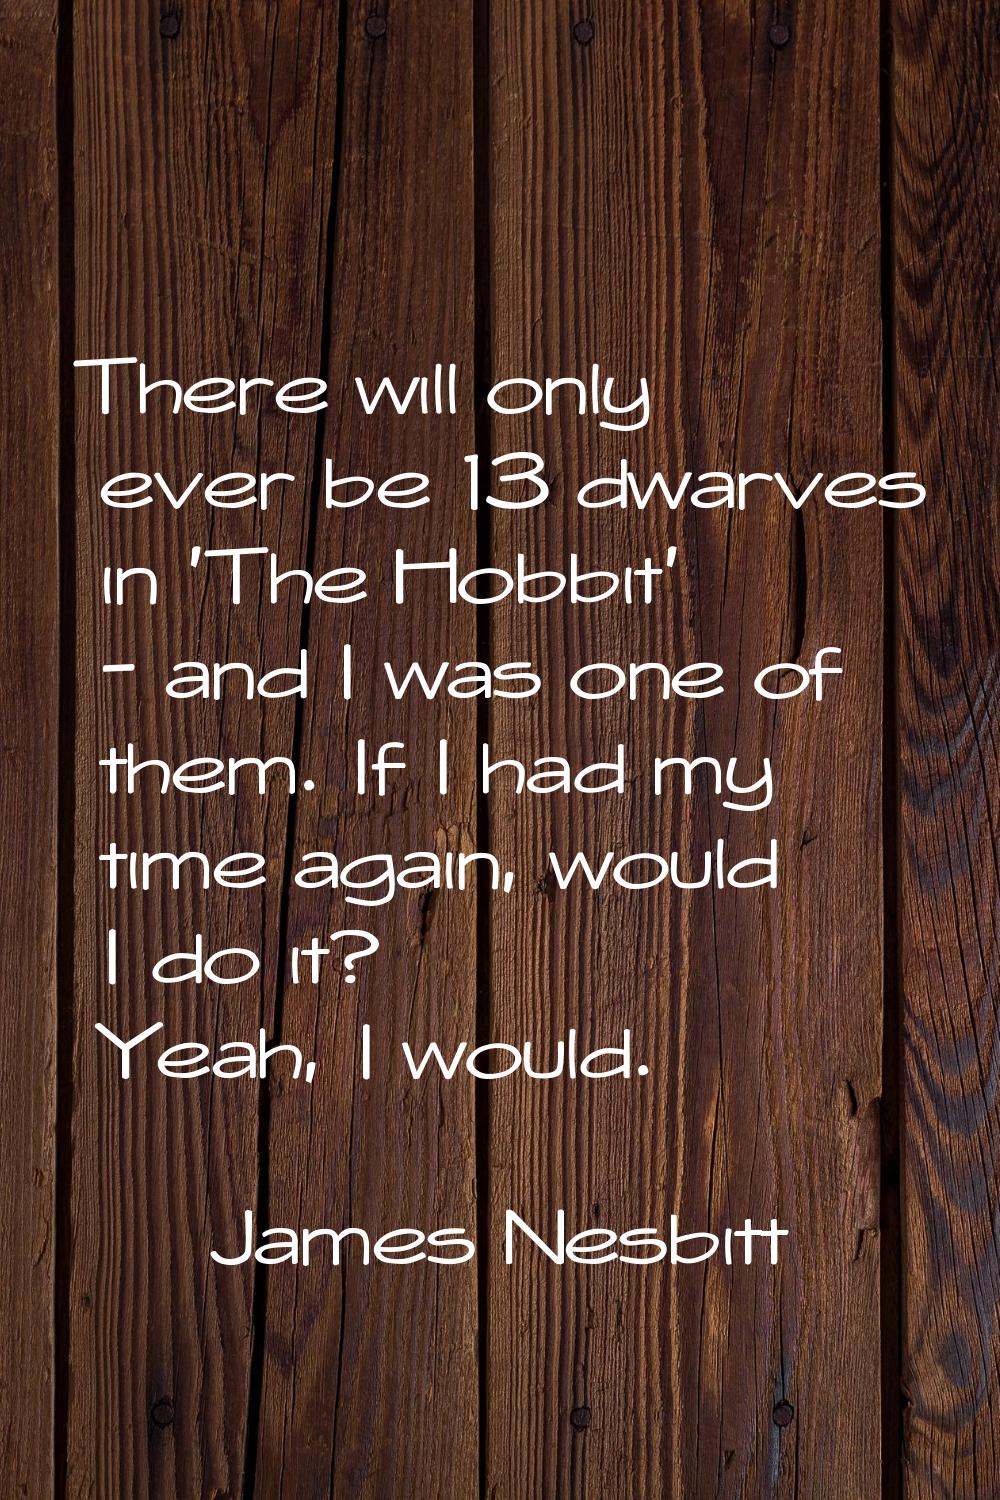 There will only ever be 13 dwarves in 'The Hobbit' - and I was one of them. If I had my time again,